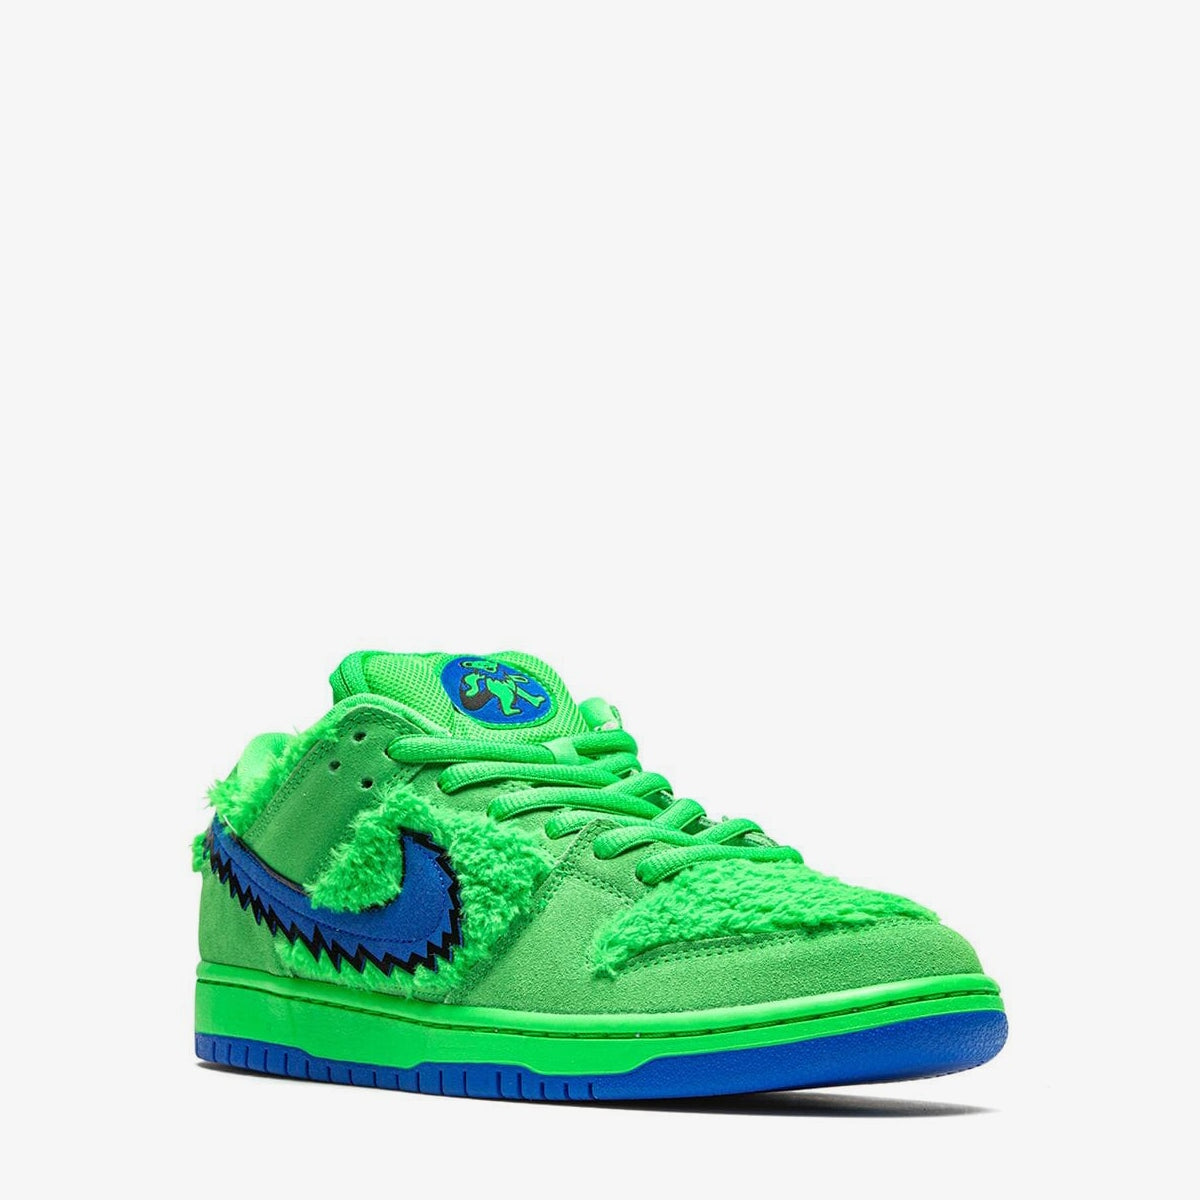 Grateful Dead x Nike Dunk Low “Green Bear” – Plug and Play